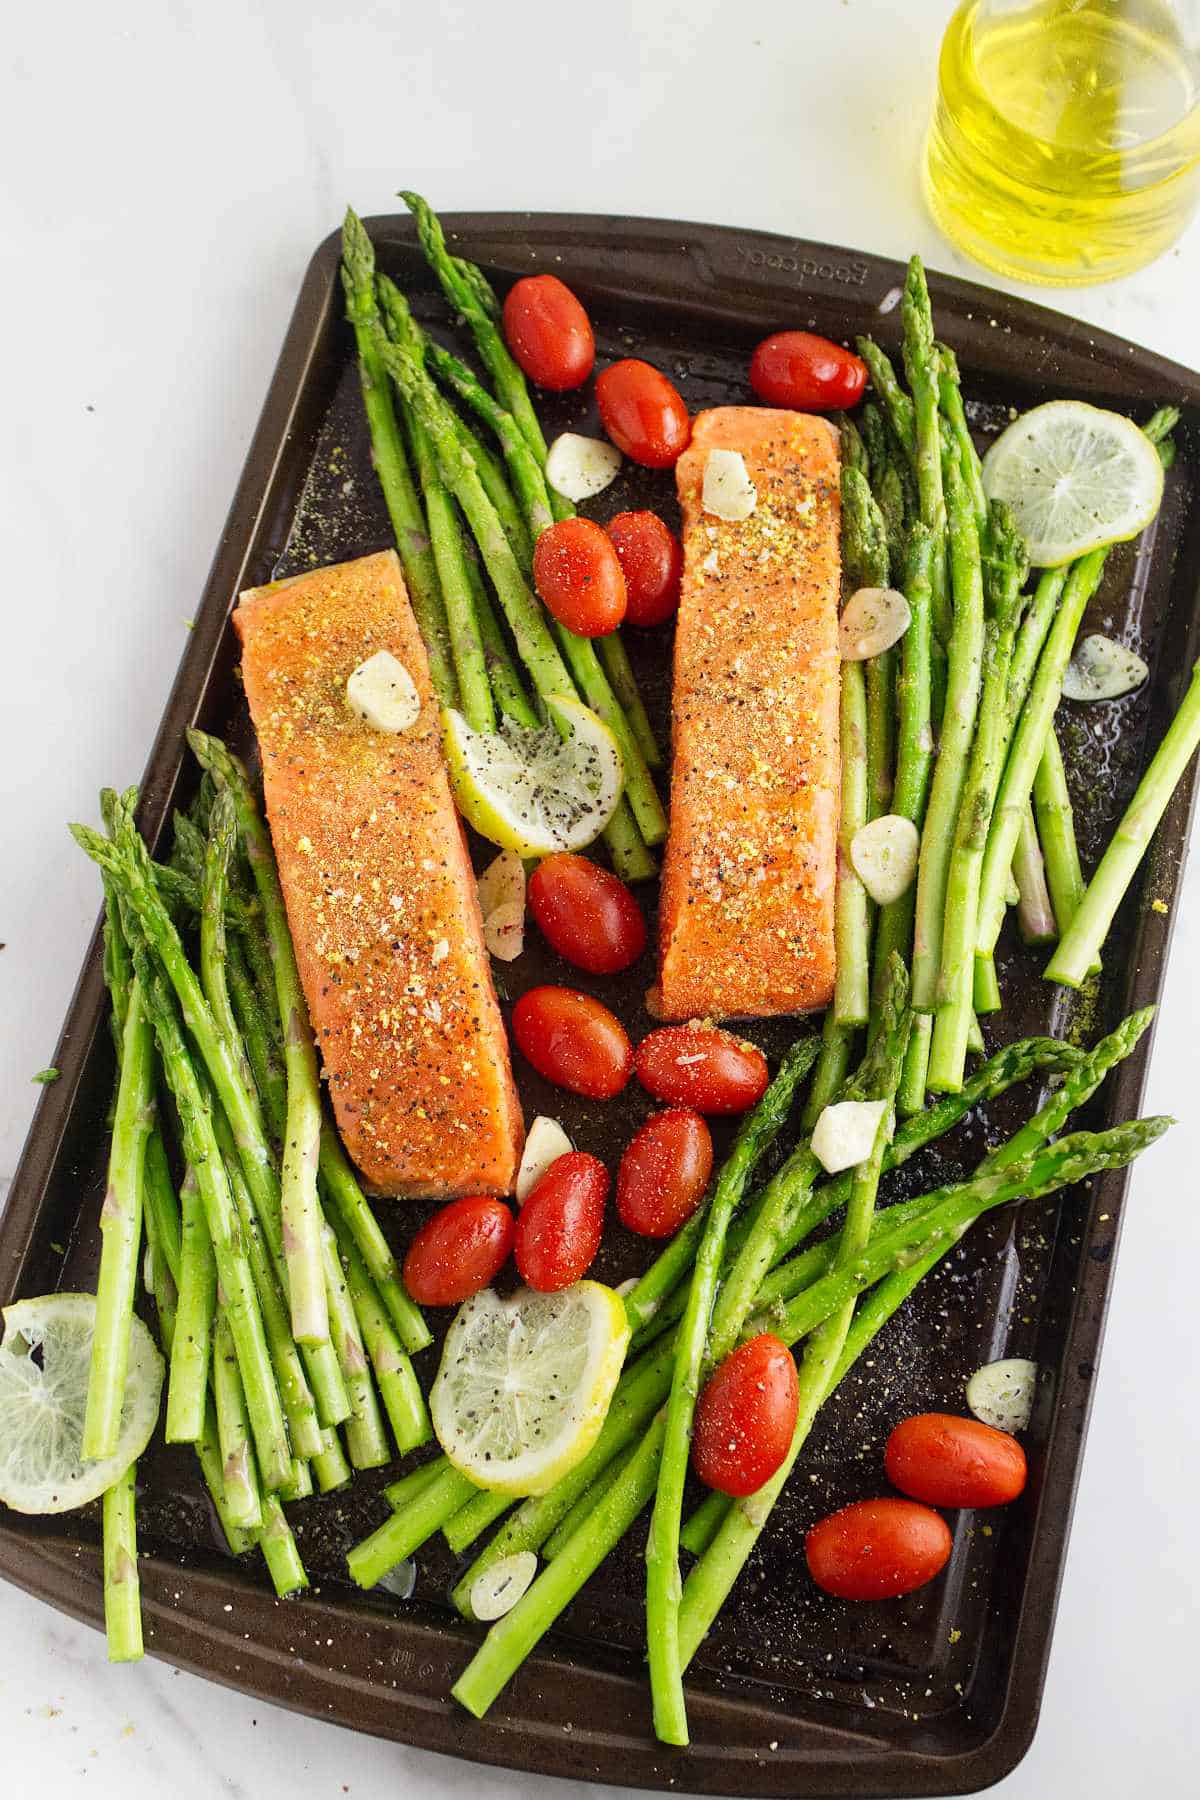 baking tray with raw seasoned asparagus spears, sliced lemons, and fish filets.